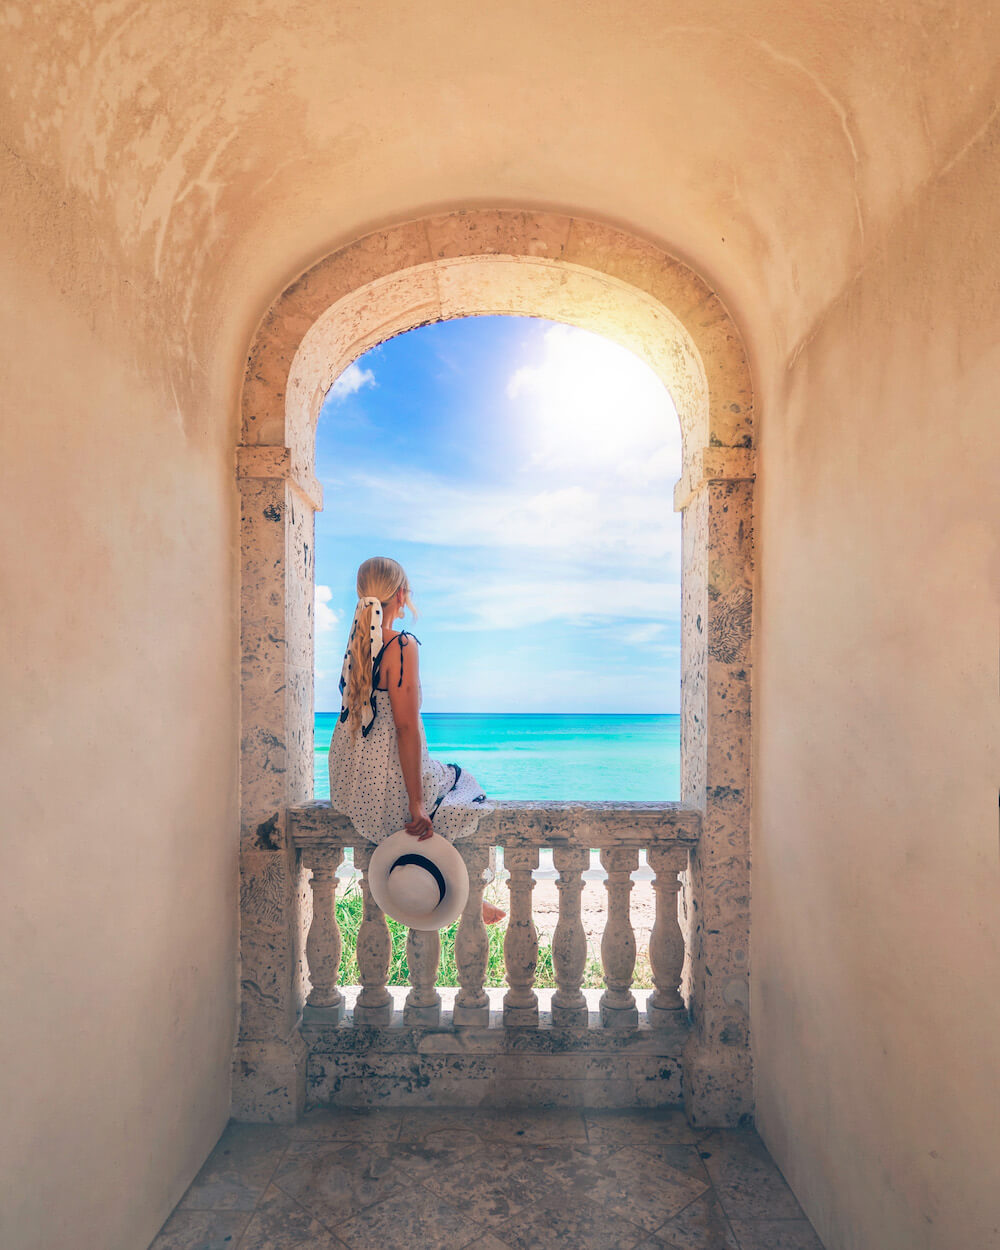 6 Most Instagrammable Locations in Boca Raton - Palm Beach Illustrated